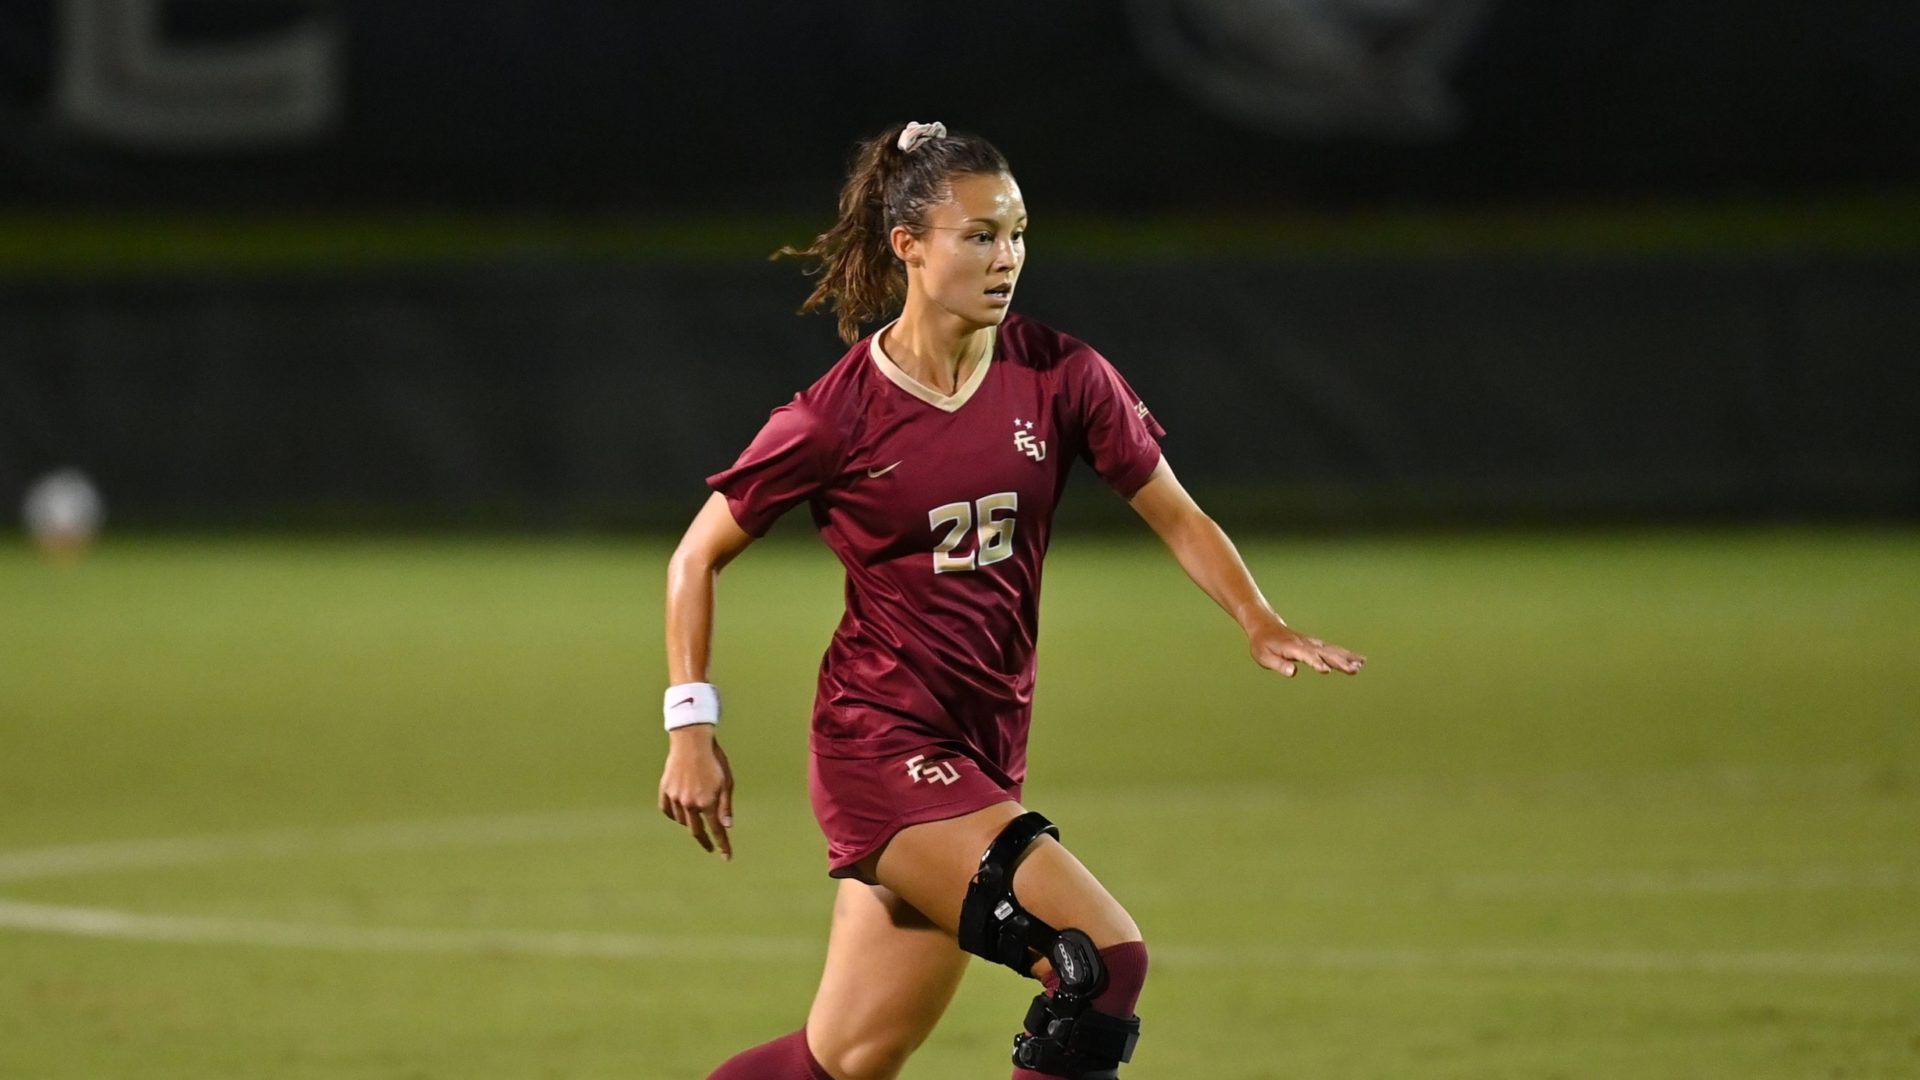 Florida State's Robbins helps Seminoles remain undefeated, earns ACC recognition